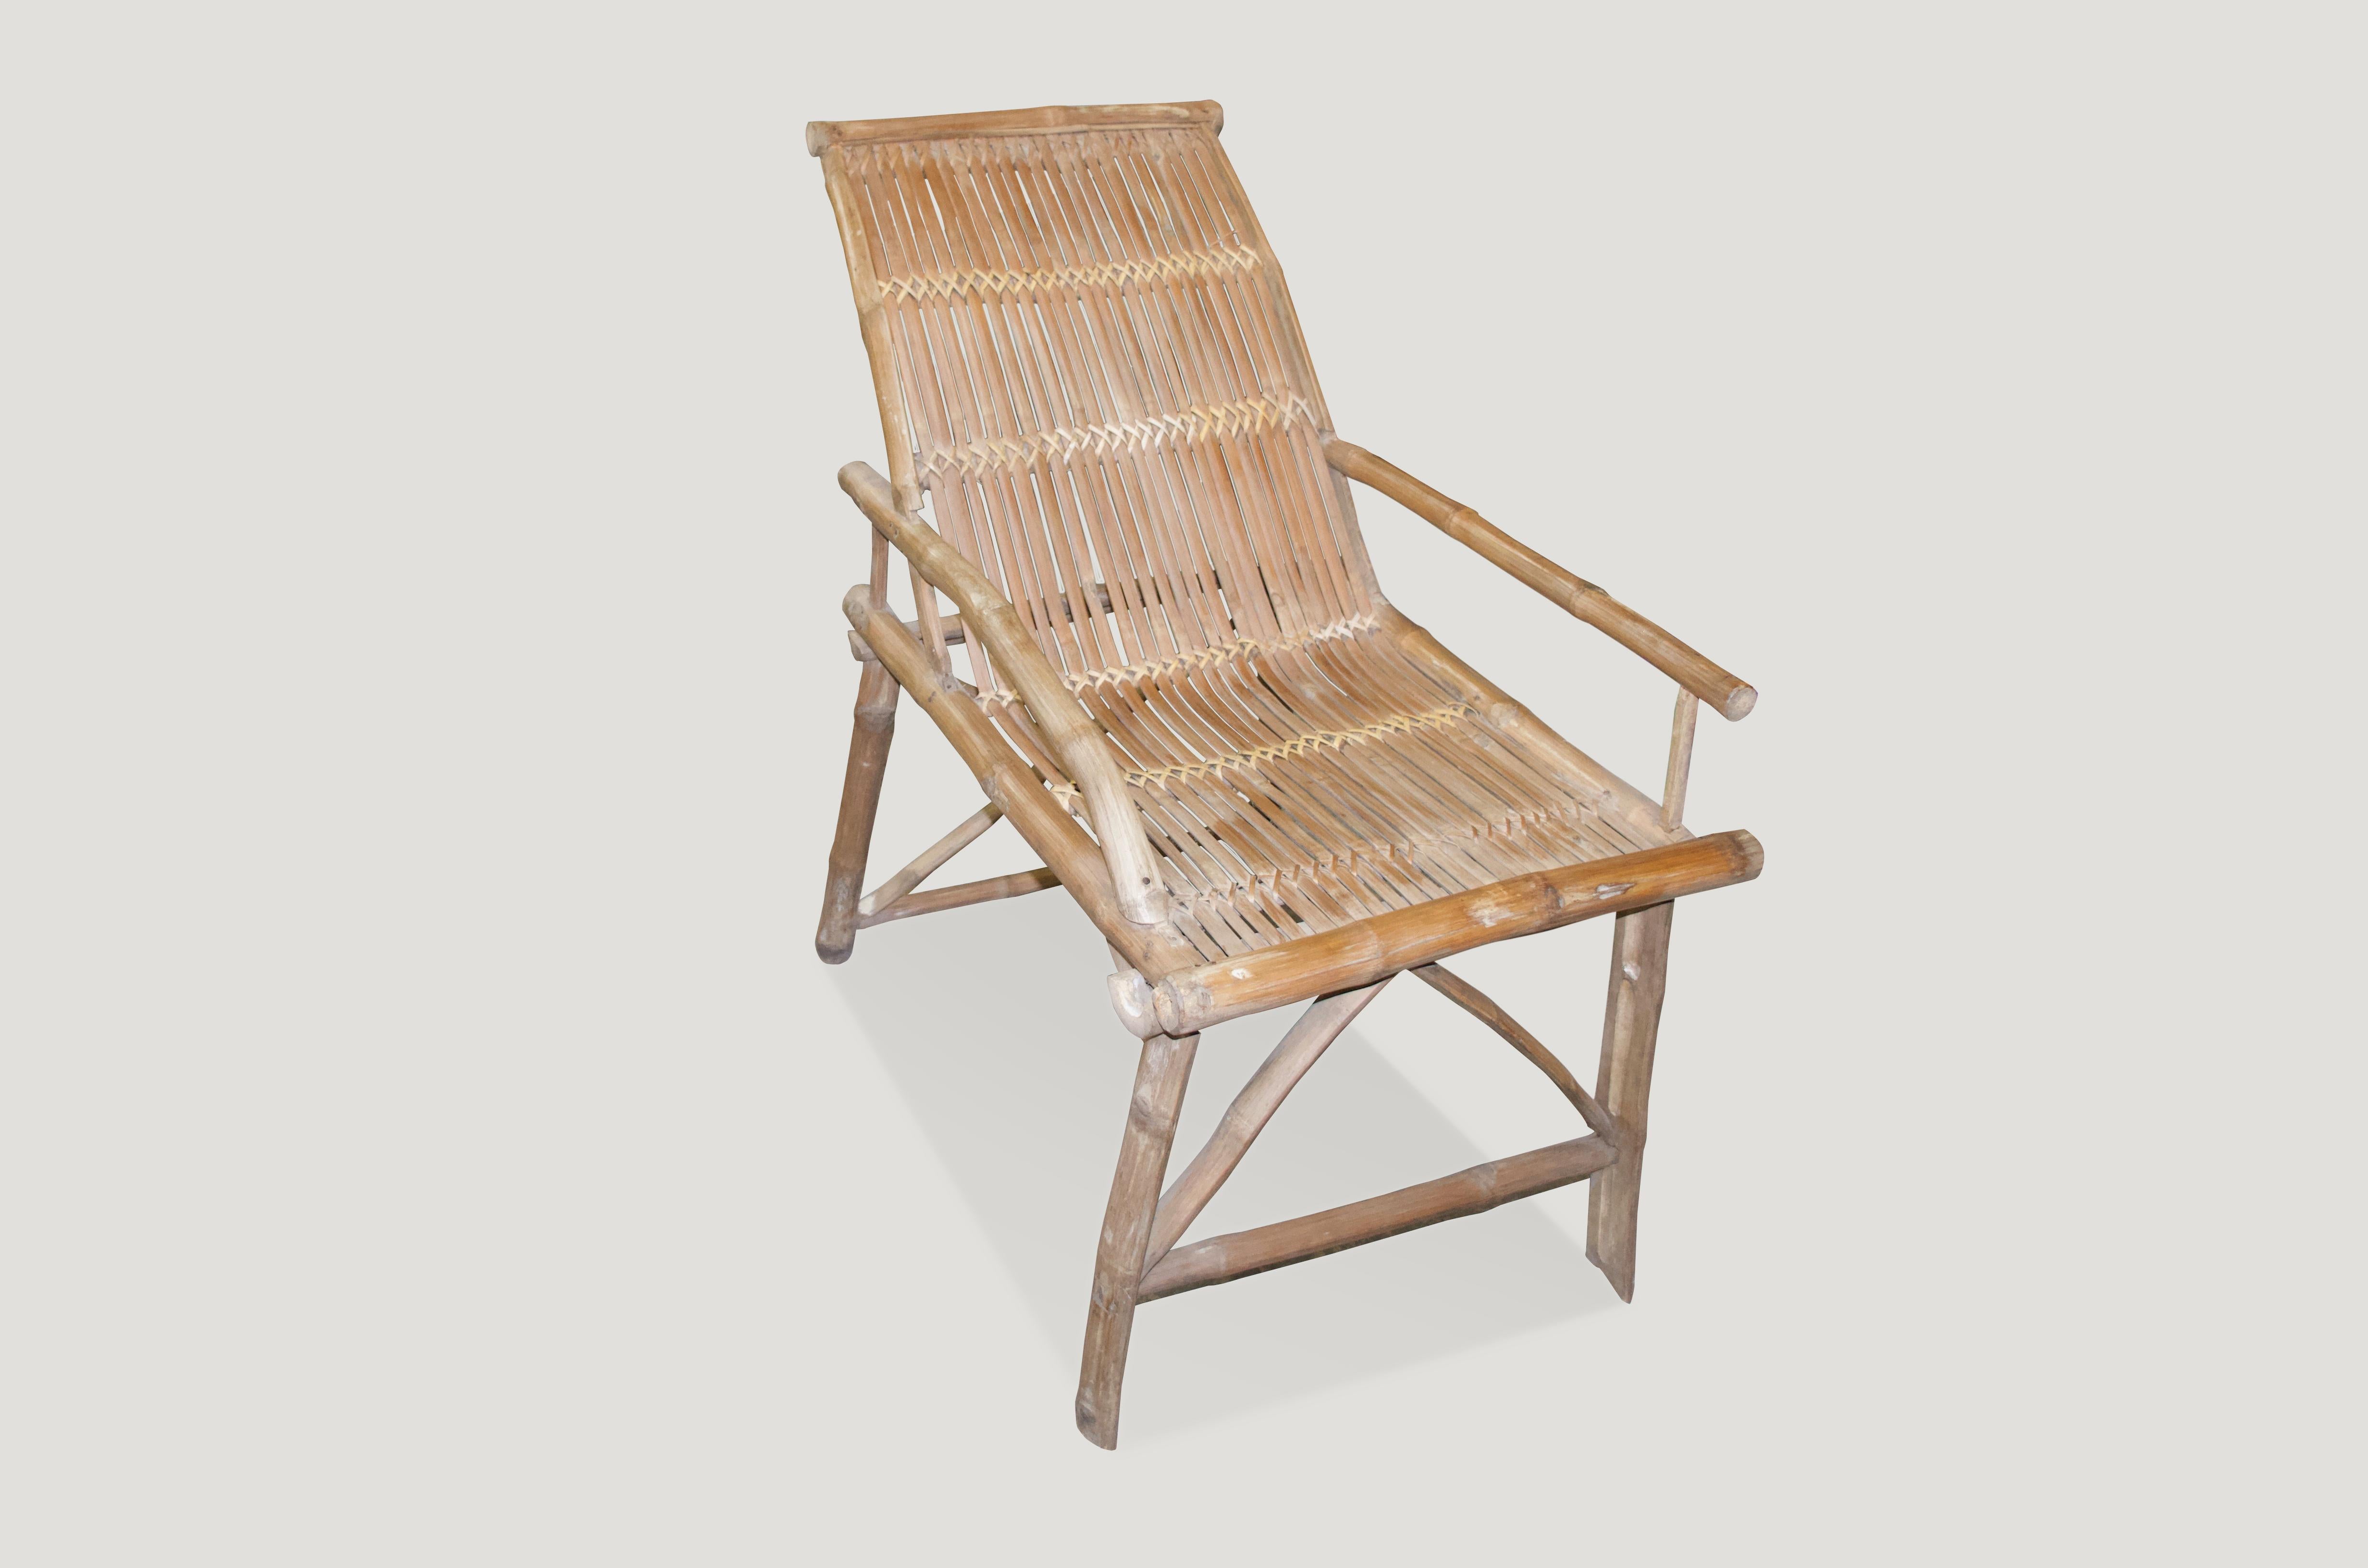 Primitive Andrianna Shamaris Antique Bamboo Wood Chair For Sale